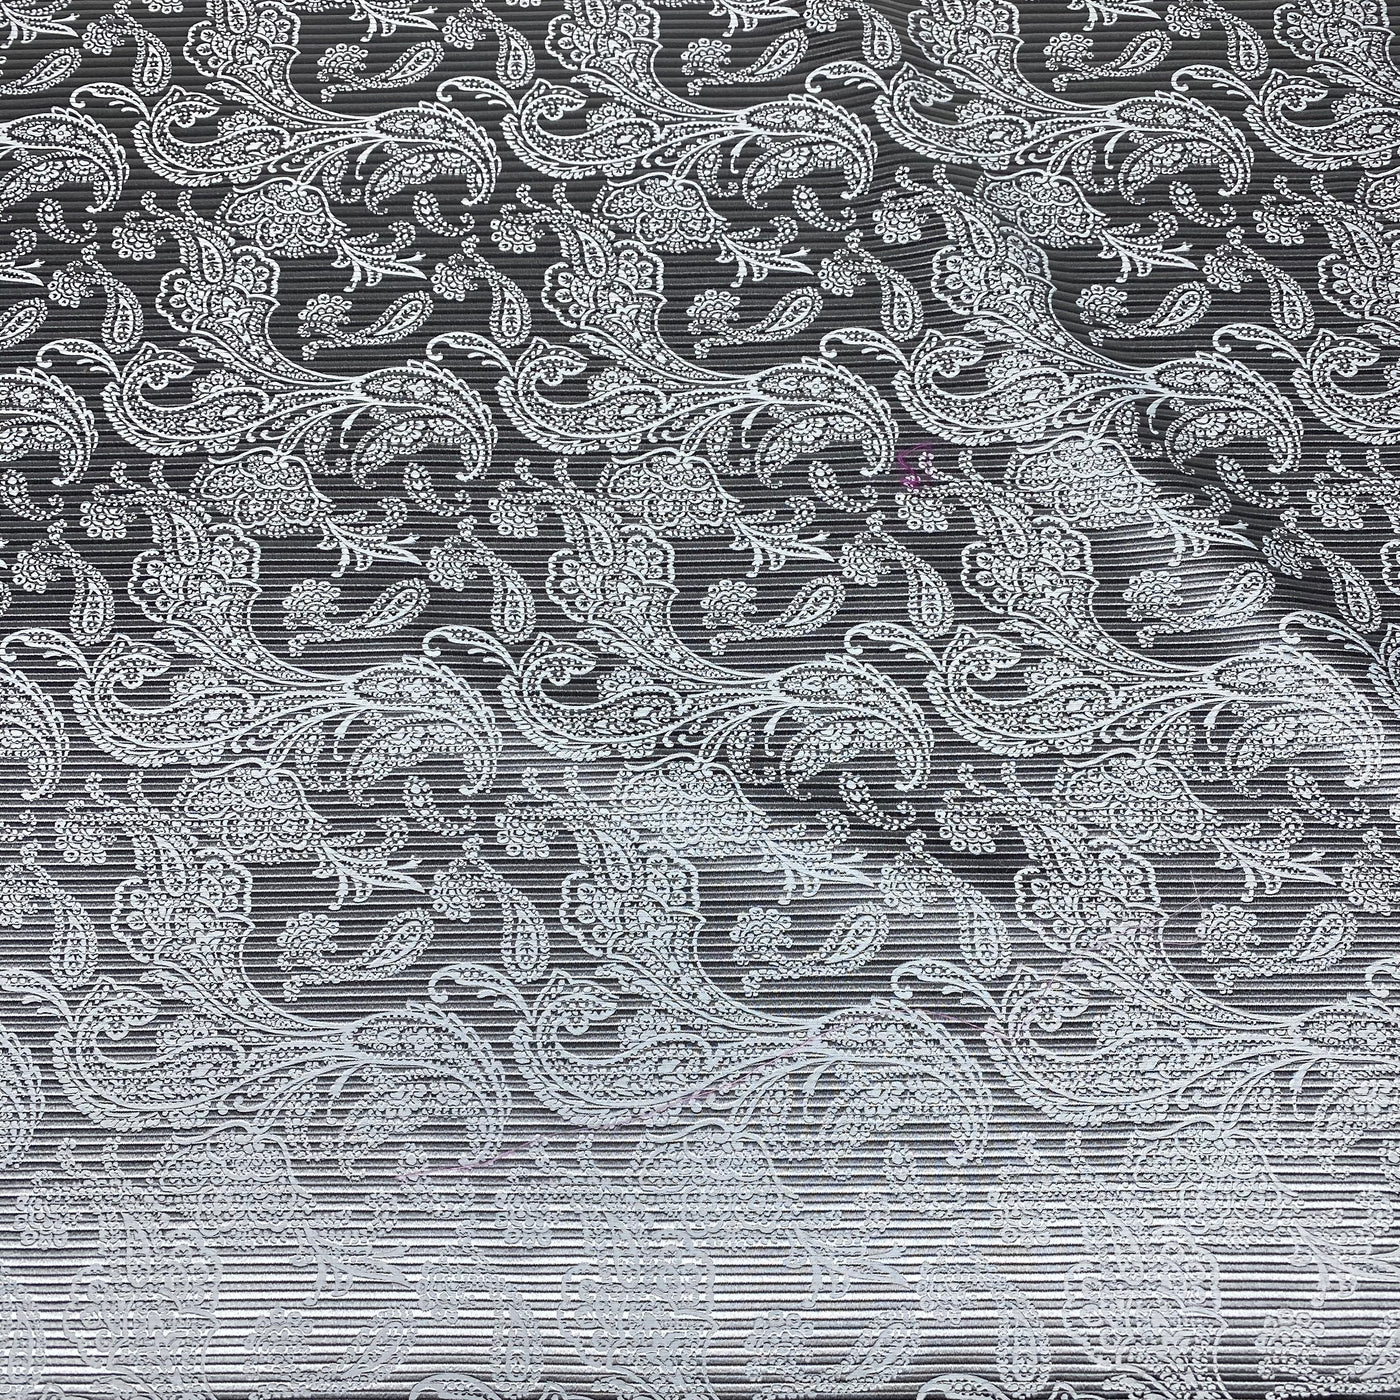 Striped Paisley Silk/Polyester Jacquard - Grey / White - Remnant